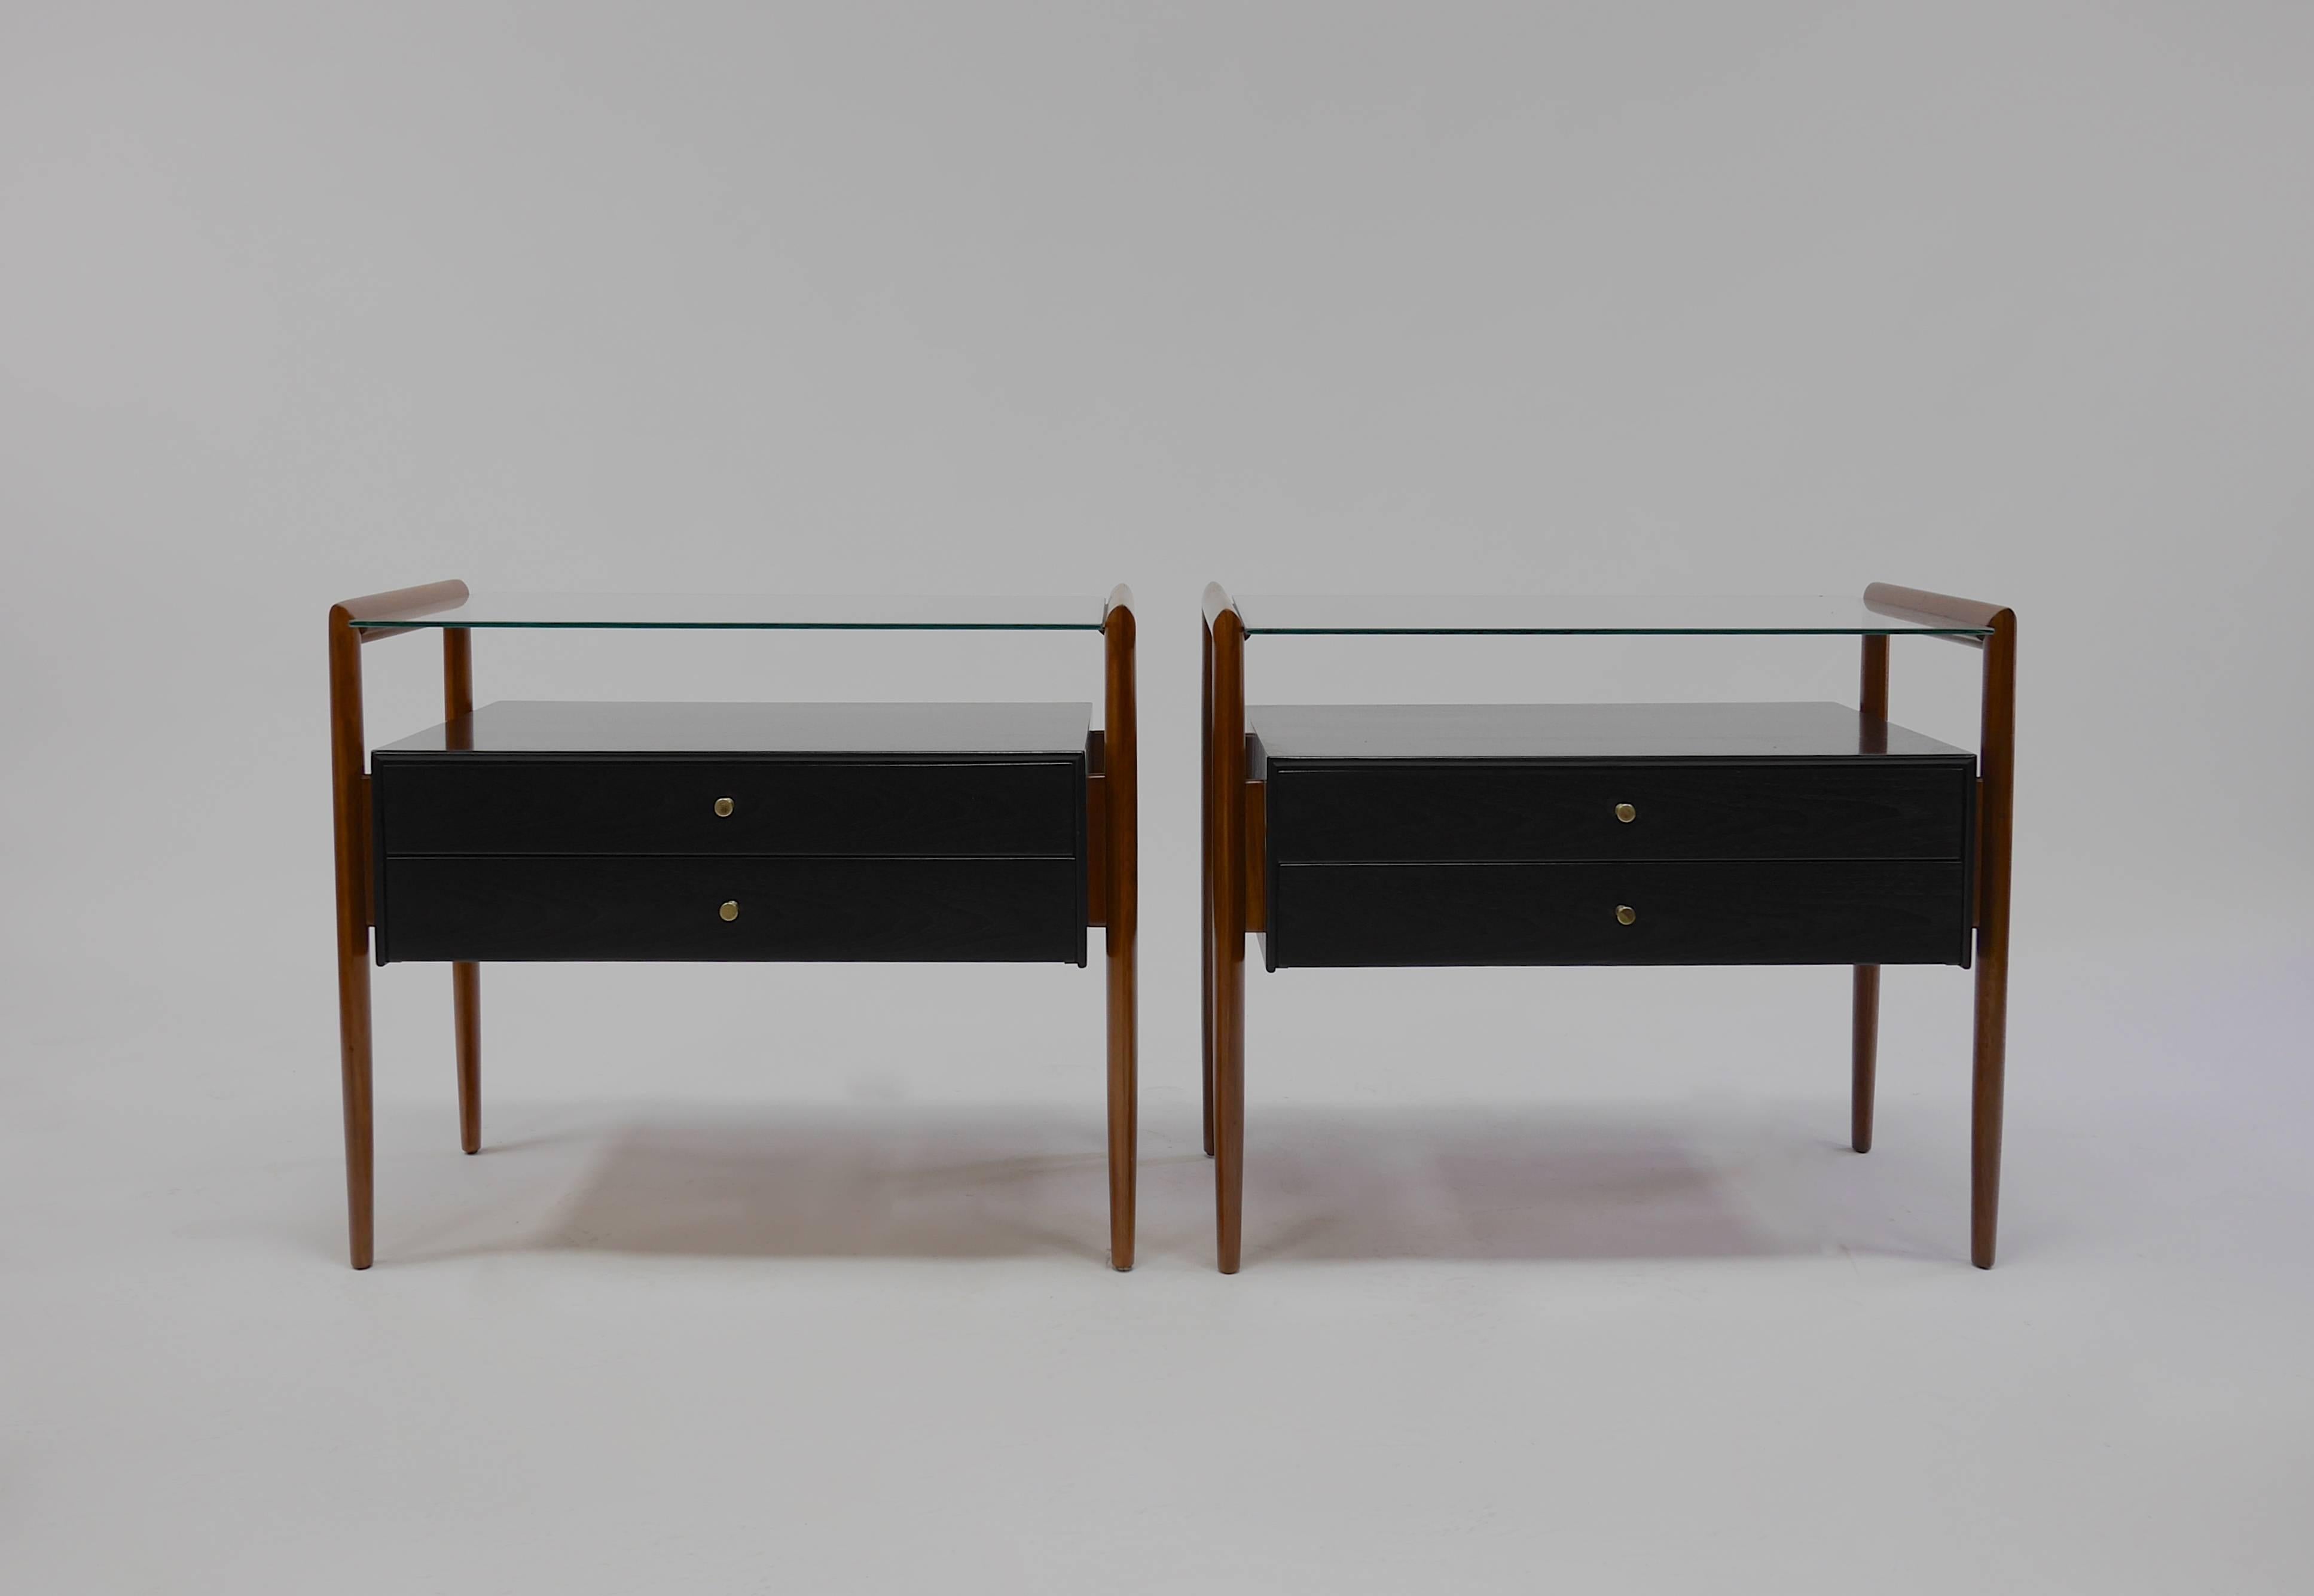 Pair of Drexel Parallel group nightstands. Walnut and glass topped nightstands from Drexel's Parallel Group having two dovetailed drawers, suspended cabinets and ovoid legs. Machined brass pulls. Done in two-tone lacquer, the legs in natural and the